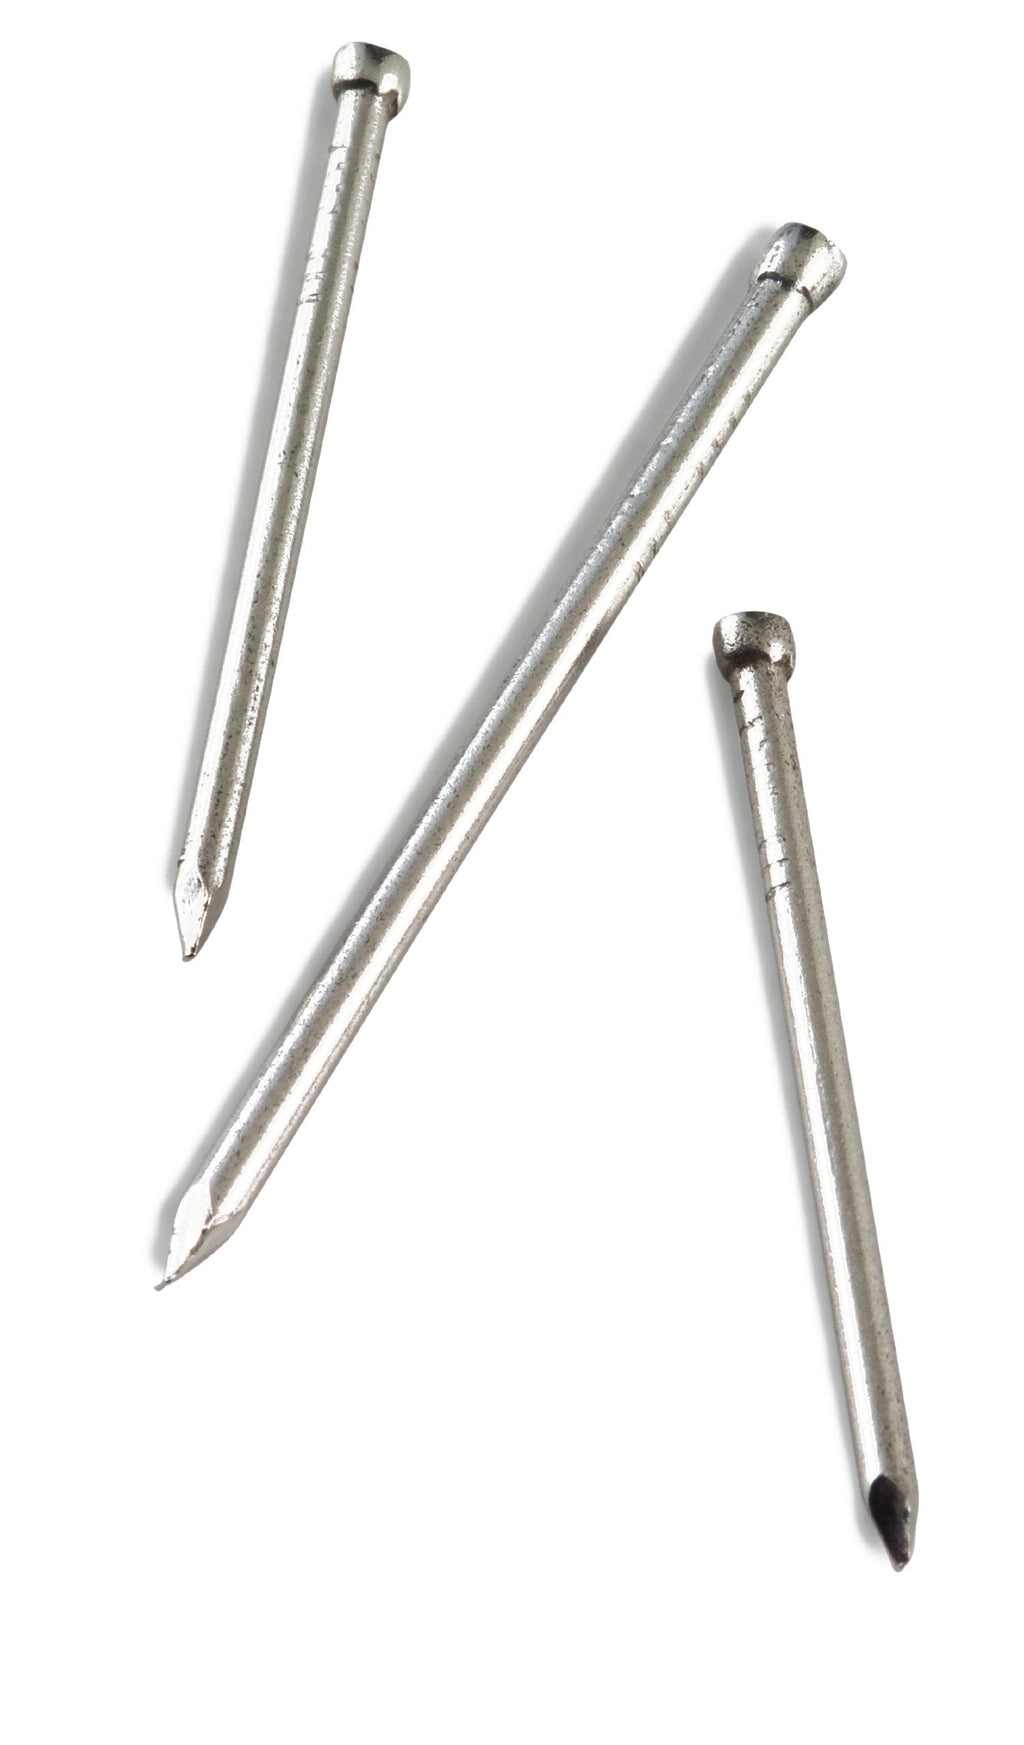  [AUSTRALIA] - Simpson Strong Tie S6FN1 6d Hand-Drive Finishing Nails with 2-Inch 13 Gauge 304 1-Pound Stainless Steel